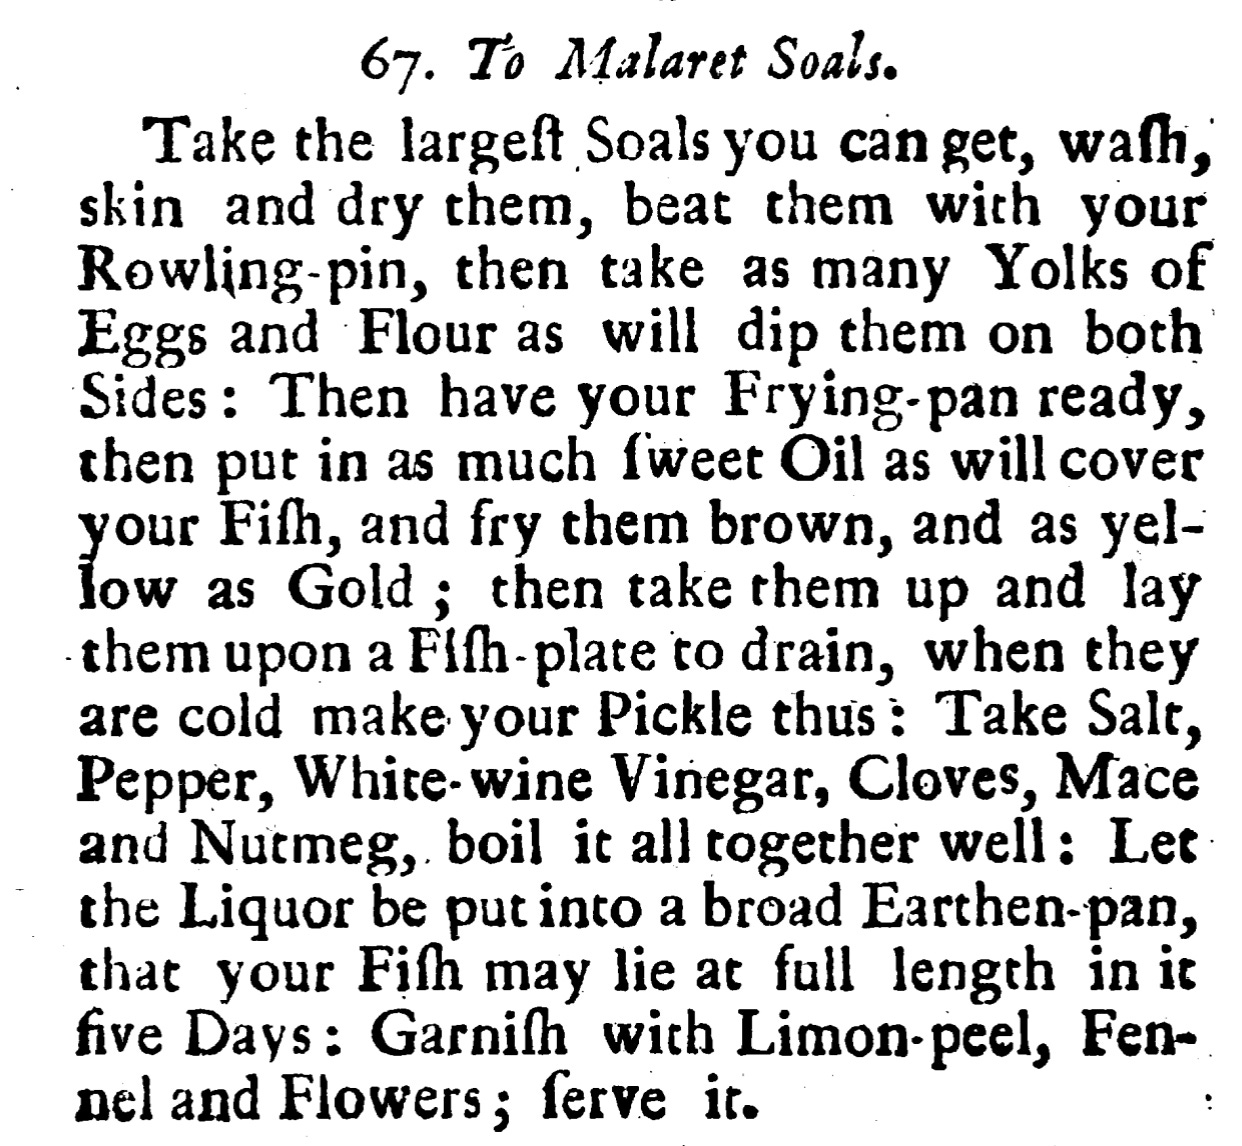 67. To Malaret Soals. Take the largeft Soals you can get, wash, skin and dry them, beat them with your Rowling- pin, then take as many Yolks of Eggs and Flour as will dip them on both Sides : Then have your Frying- pan ready, then put in as much fweet Oil as will cover your Fiſh, and fry them brown, and as yel low as Gold ; then take them up and lay them upon a Fiſh- plate to drain, when they are cold make your Pickle thus : Take Salt, Pepper, White- wine Vinegar, Cloves, Mace and Nutmeg, boil it all together well : Let the Liquor be put into a broad Earthen- pan, that your Fish may lie at full length in it five Days : Garnish with Limon- peel, Fen nel and Flowers ; ferve it.